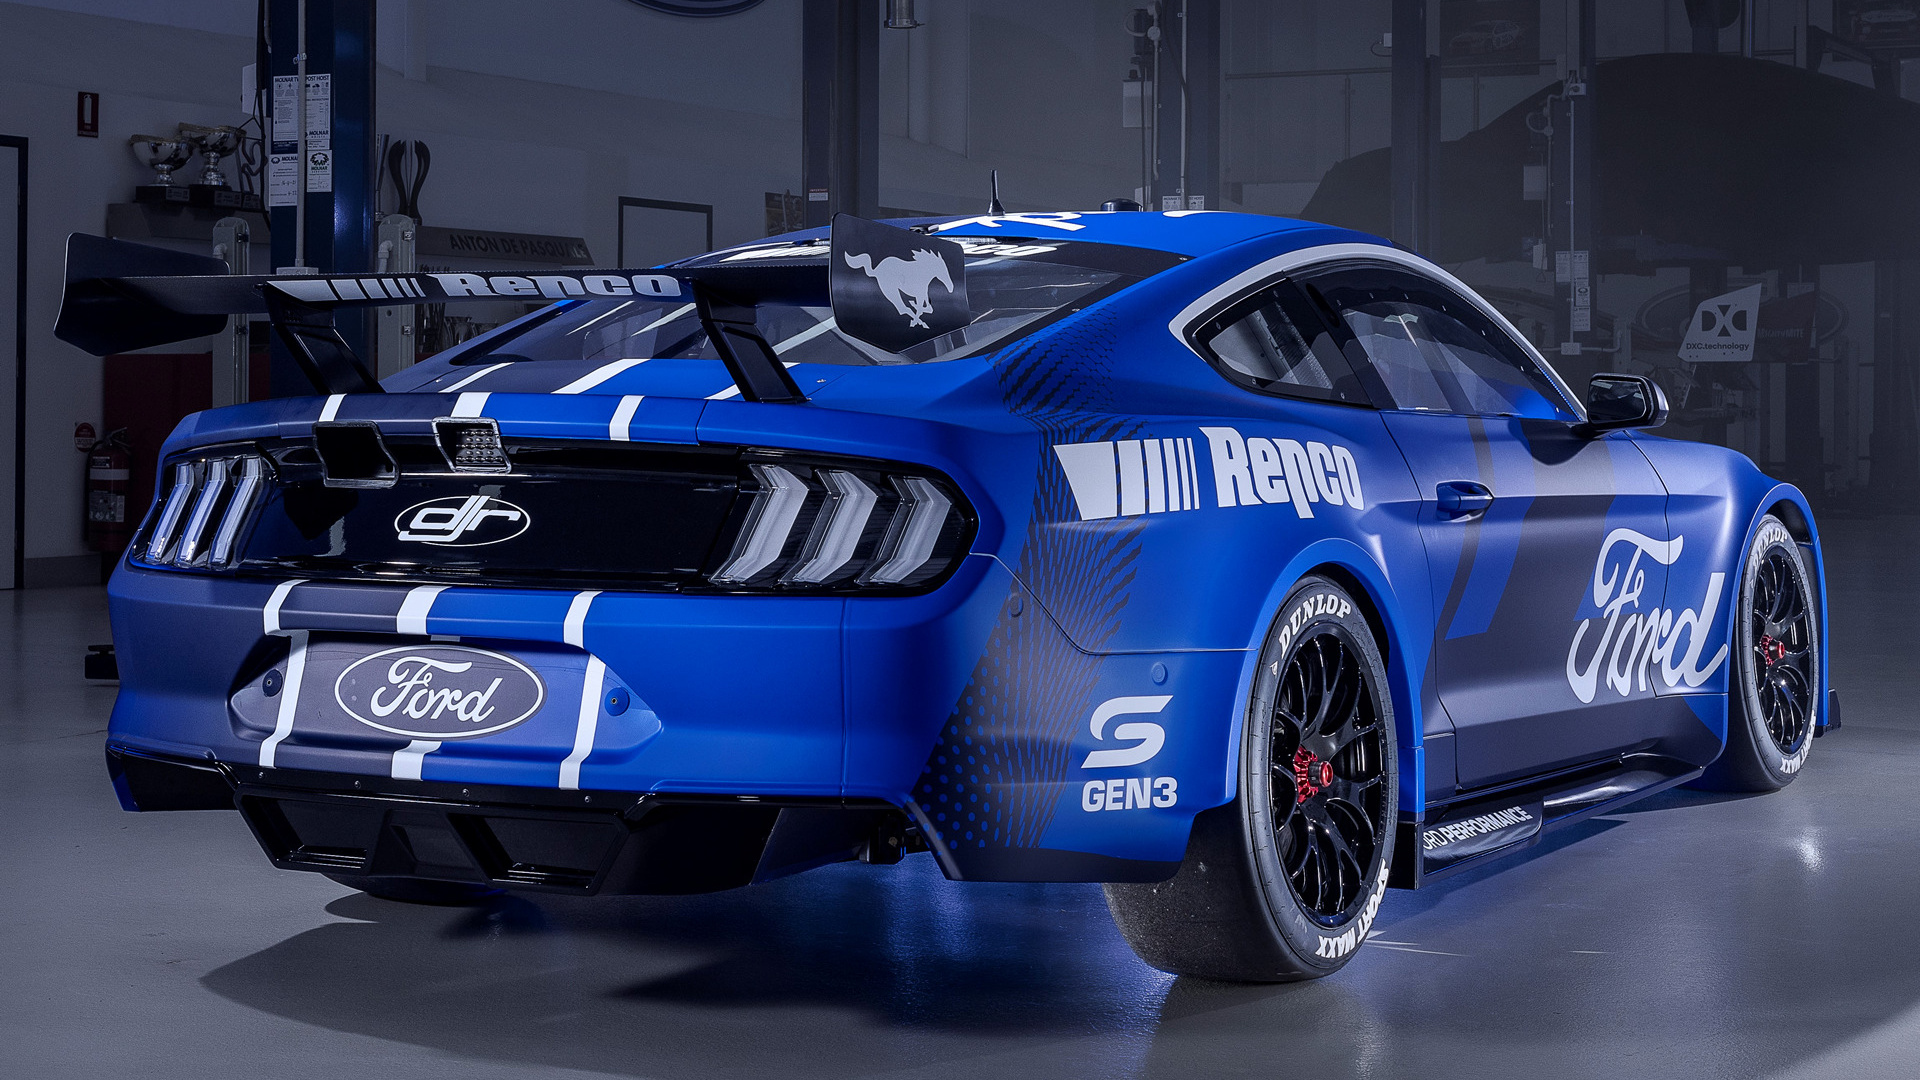 2022 Ford Mustang GT Supercar and HD Image